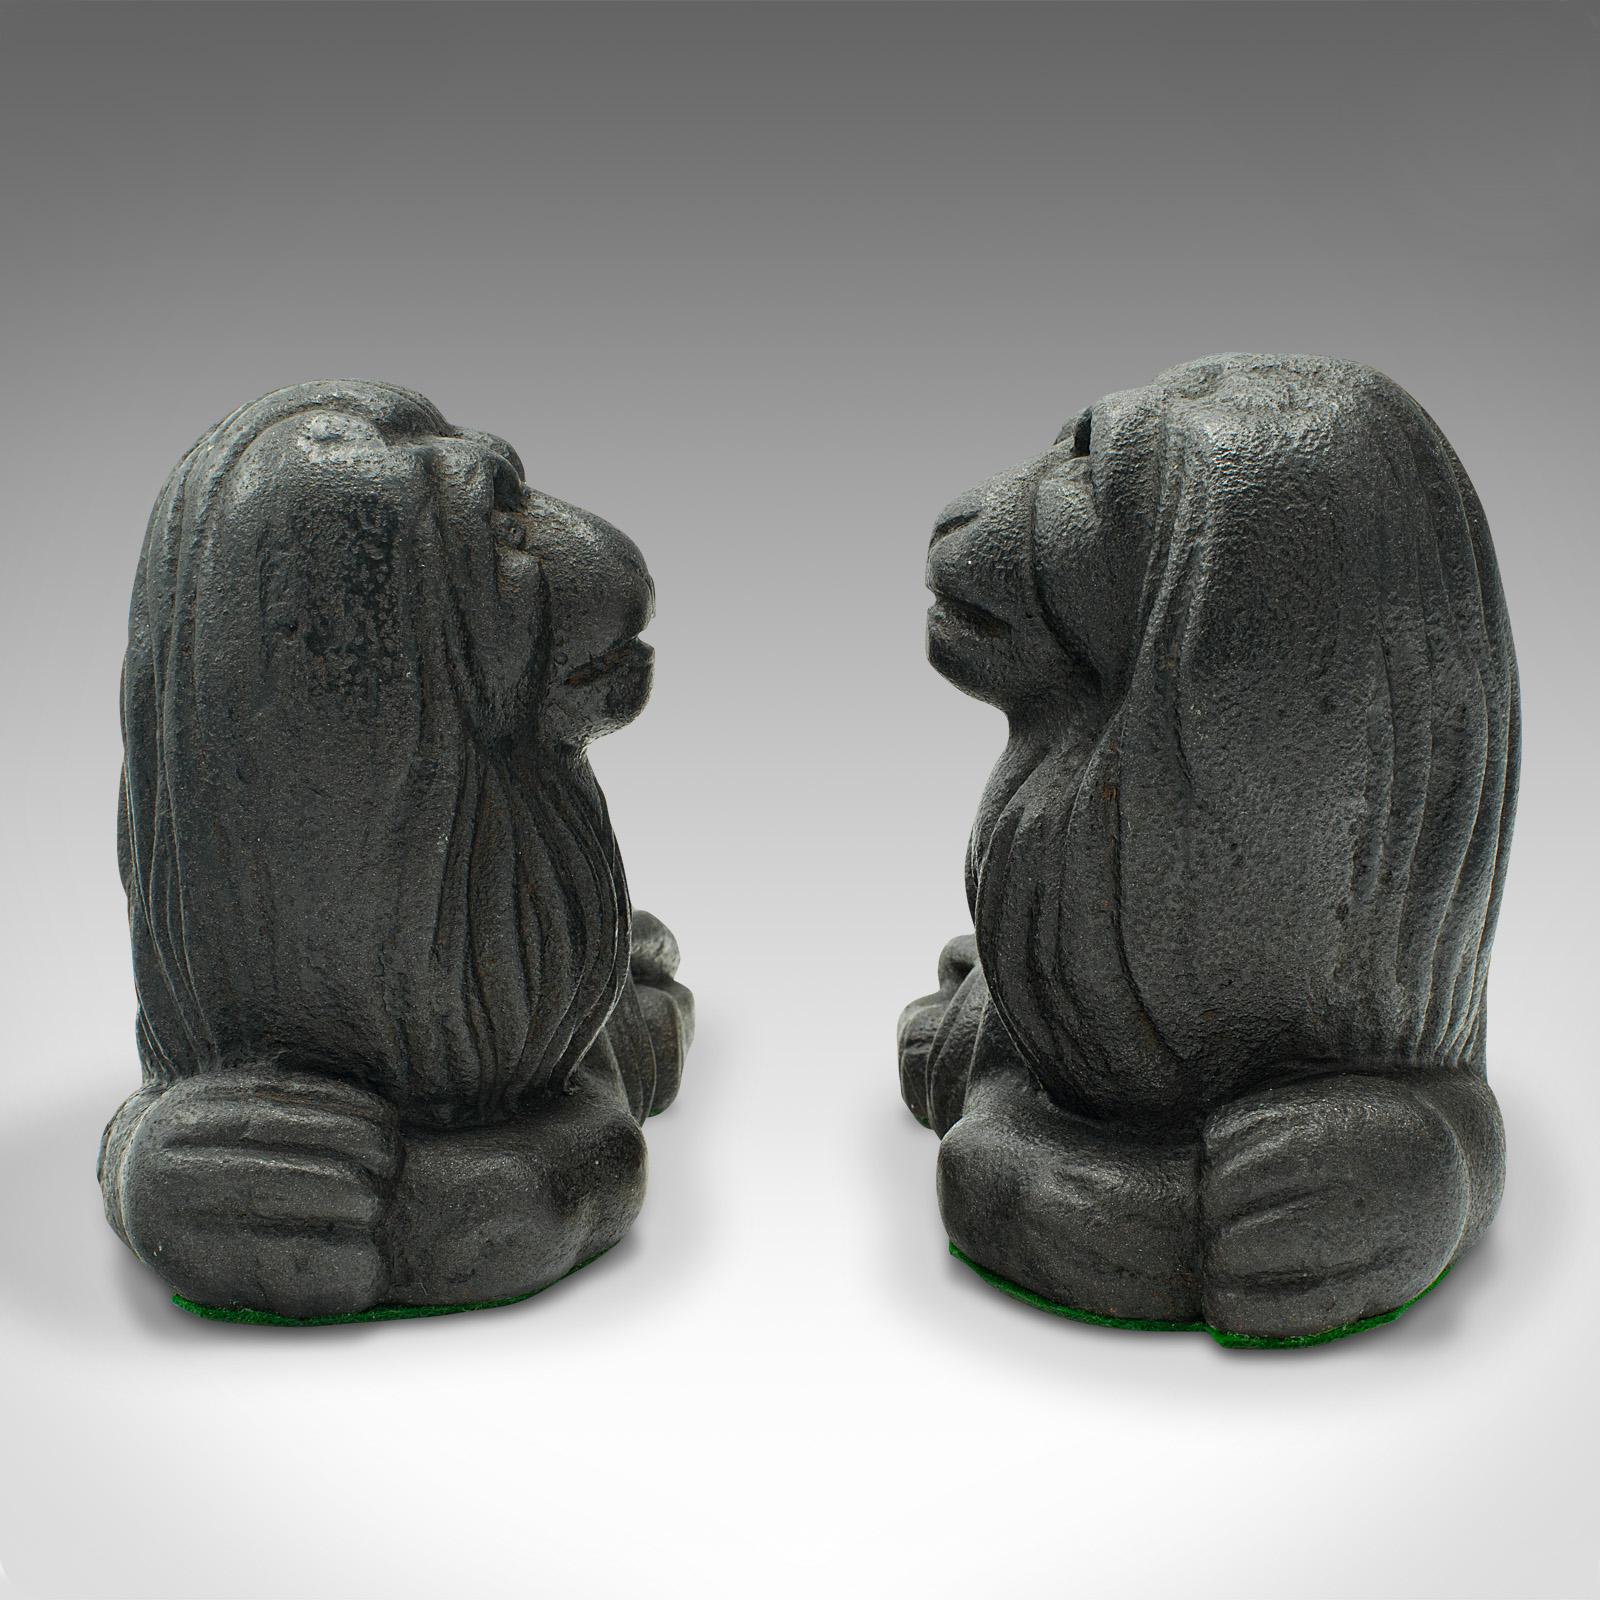 Pair of Antique Lion Bookends, English, Cast Iron, Decor, Book Rest, Victorian In Good Condition For Sale In Hele, Devon, GB